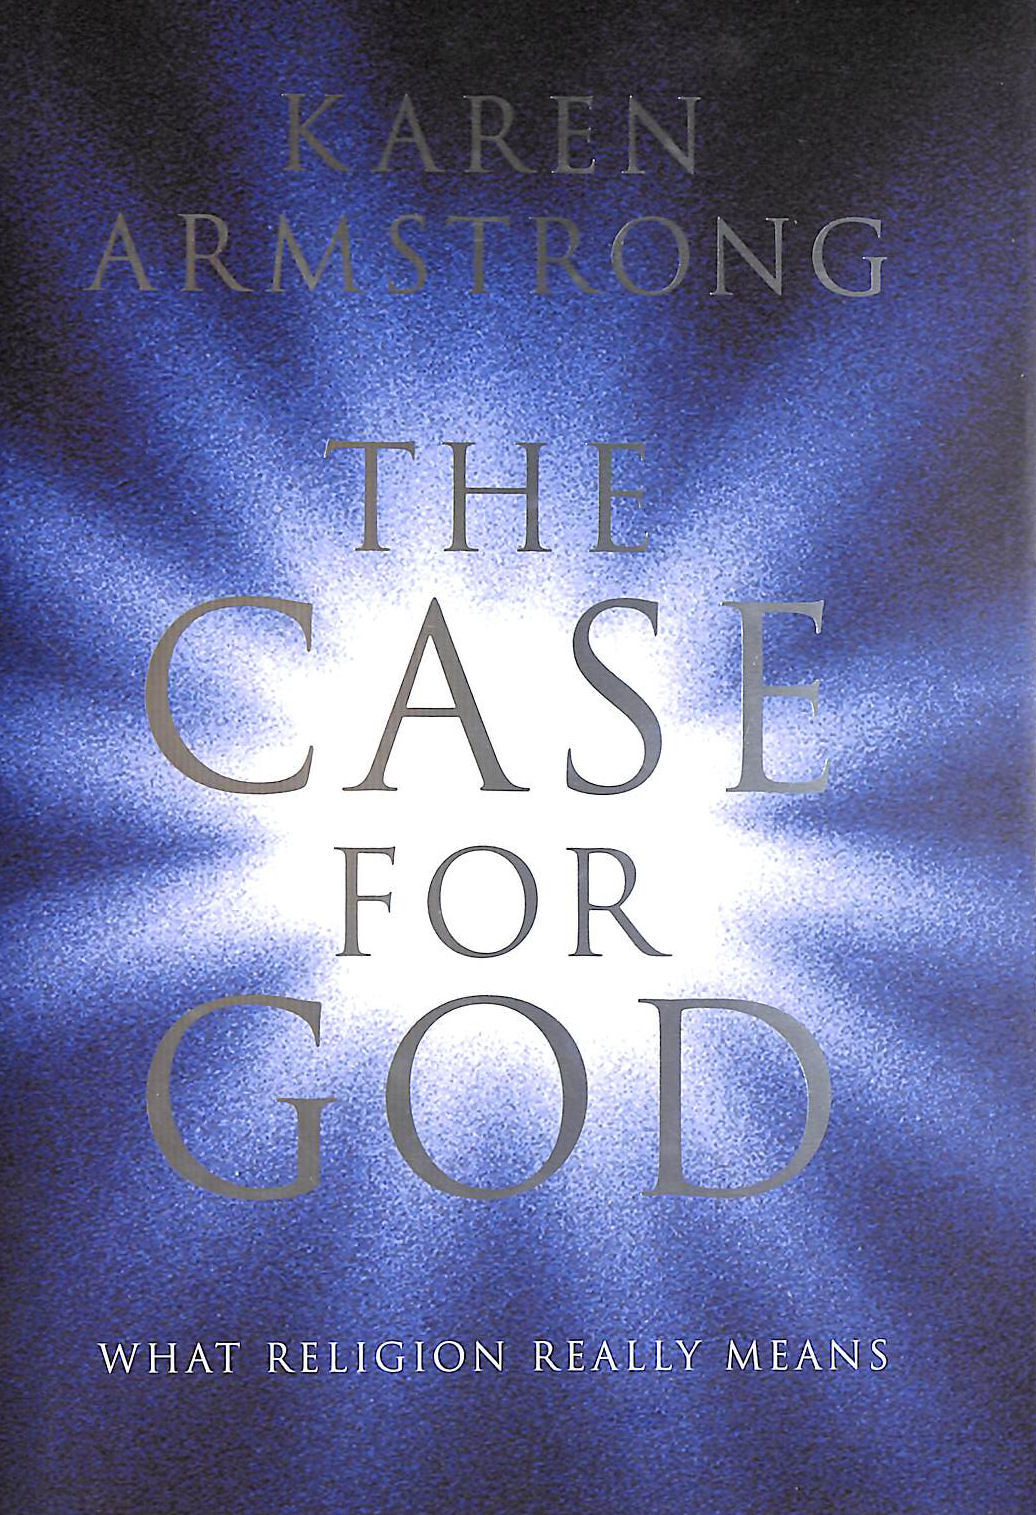 ARMSTRONG, KAREN - The Case for God: What religion really means